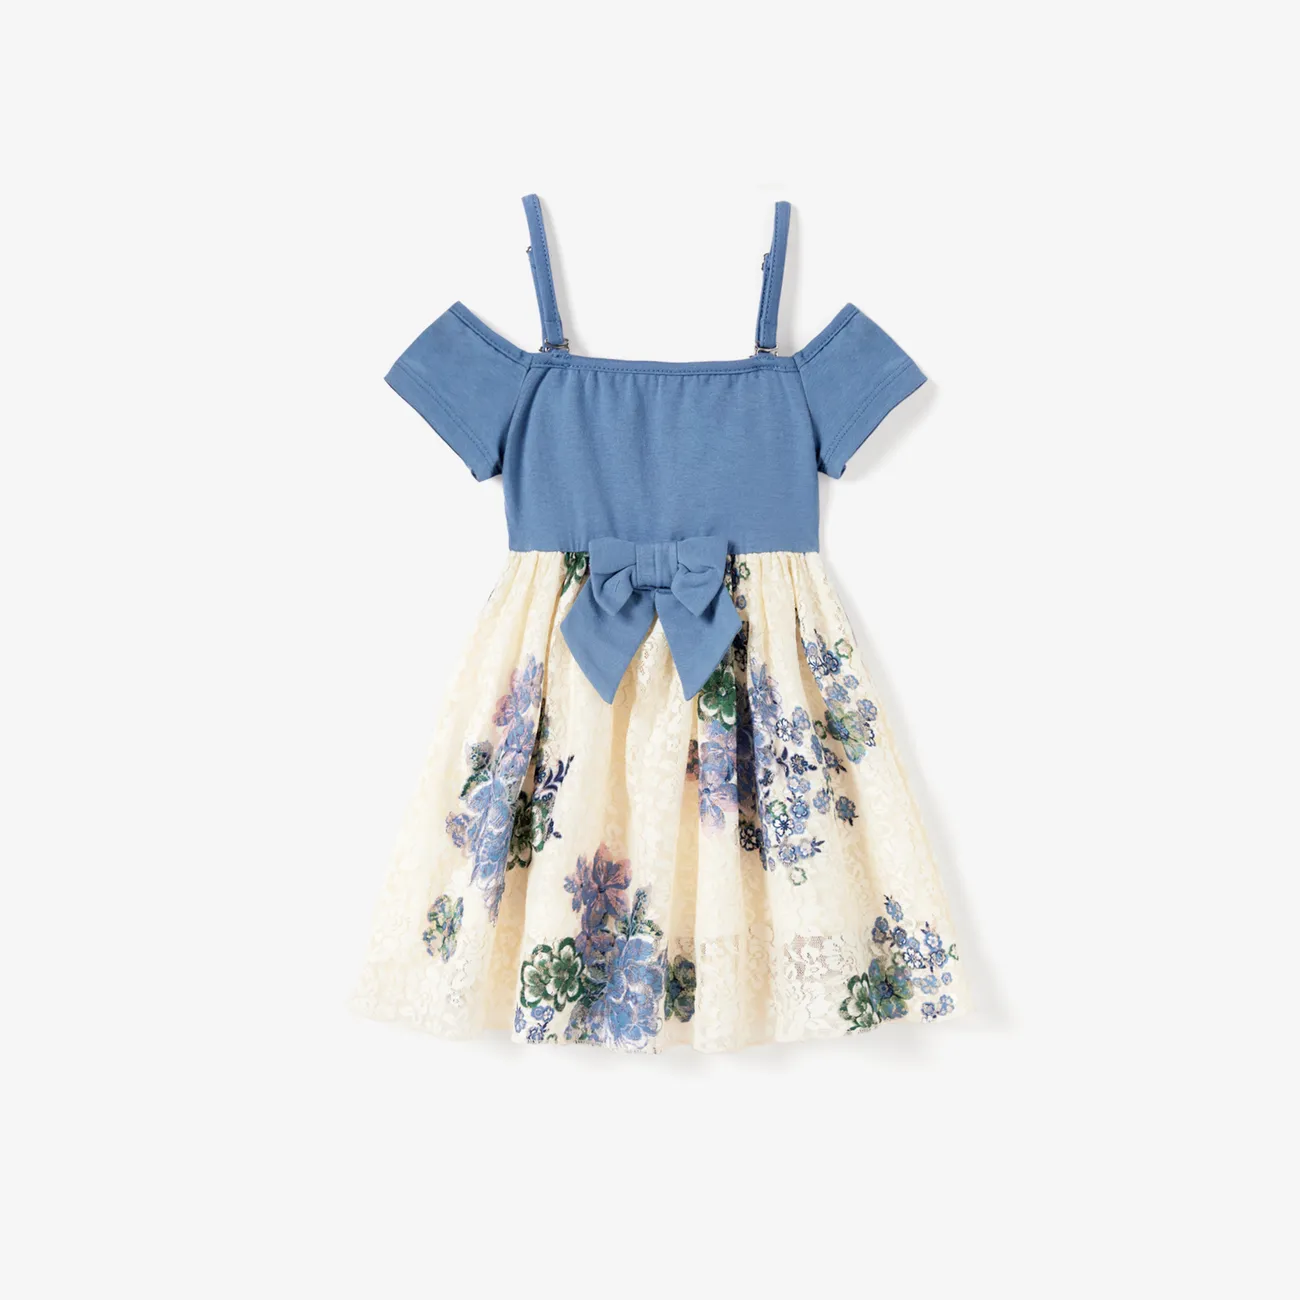 Family Matching Panel Stripe Tee and Open Shoulder Floral Lace Bottom Dress Sets Blue big image 1